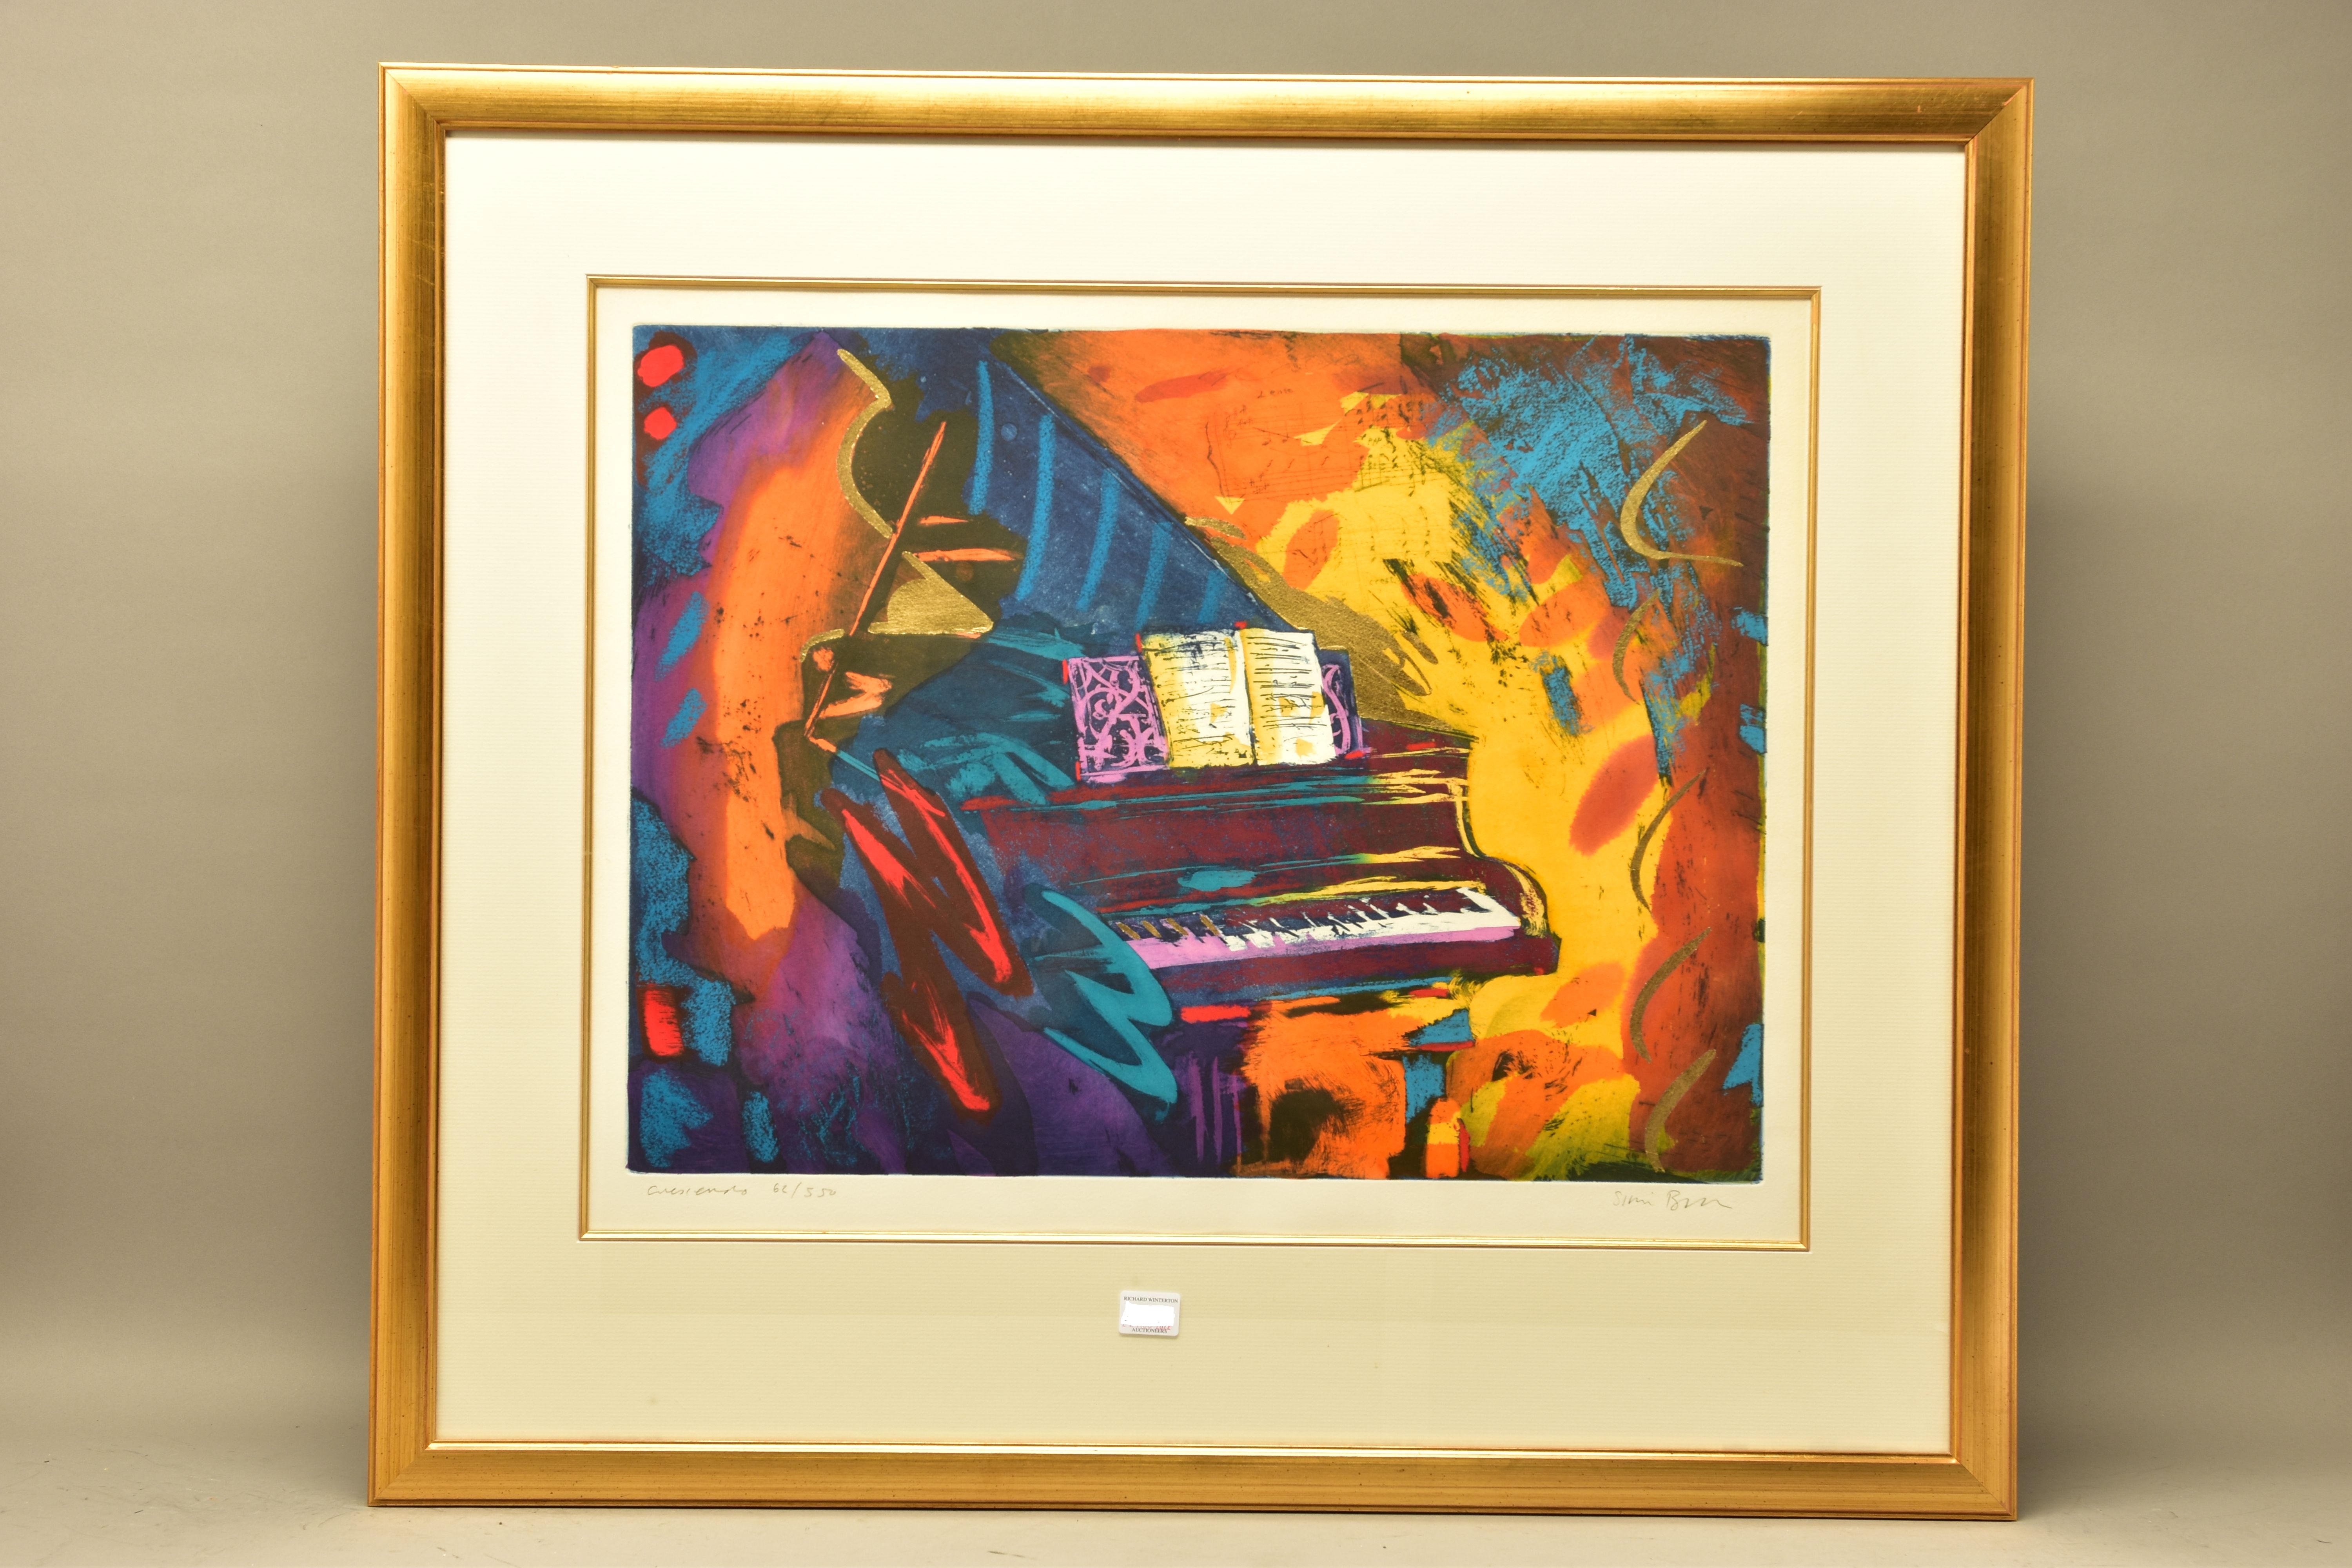 SIMON BULL (BRITISH 1958) 'CRESCENDO', a signed limited edition screen print depicting a concert